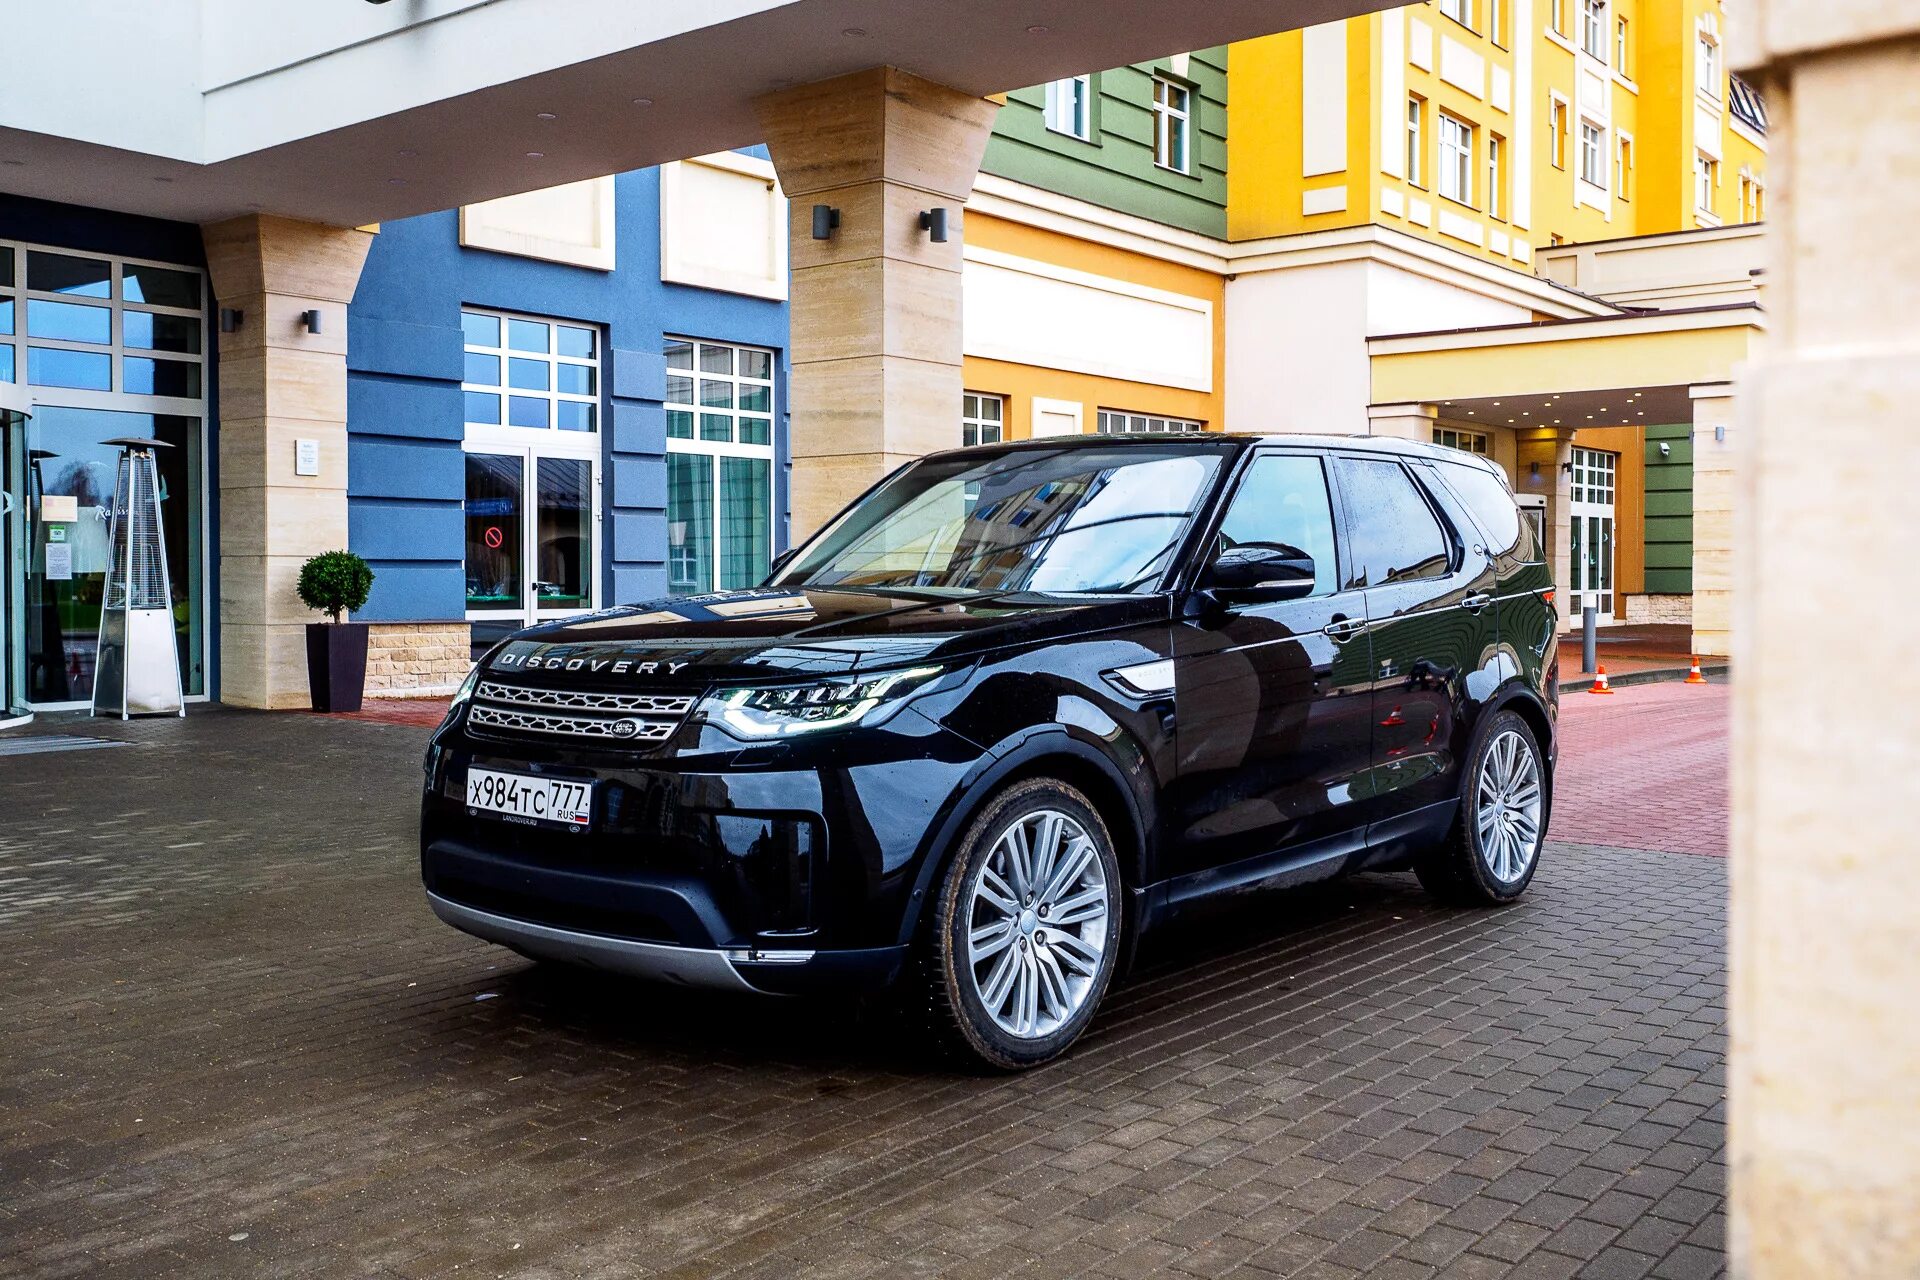 Land Rover Discovery 5. Range Rover Discovery 5. Ленд Ровер Дискавери 5 черный. Range Rover Discovery 5 2017.